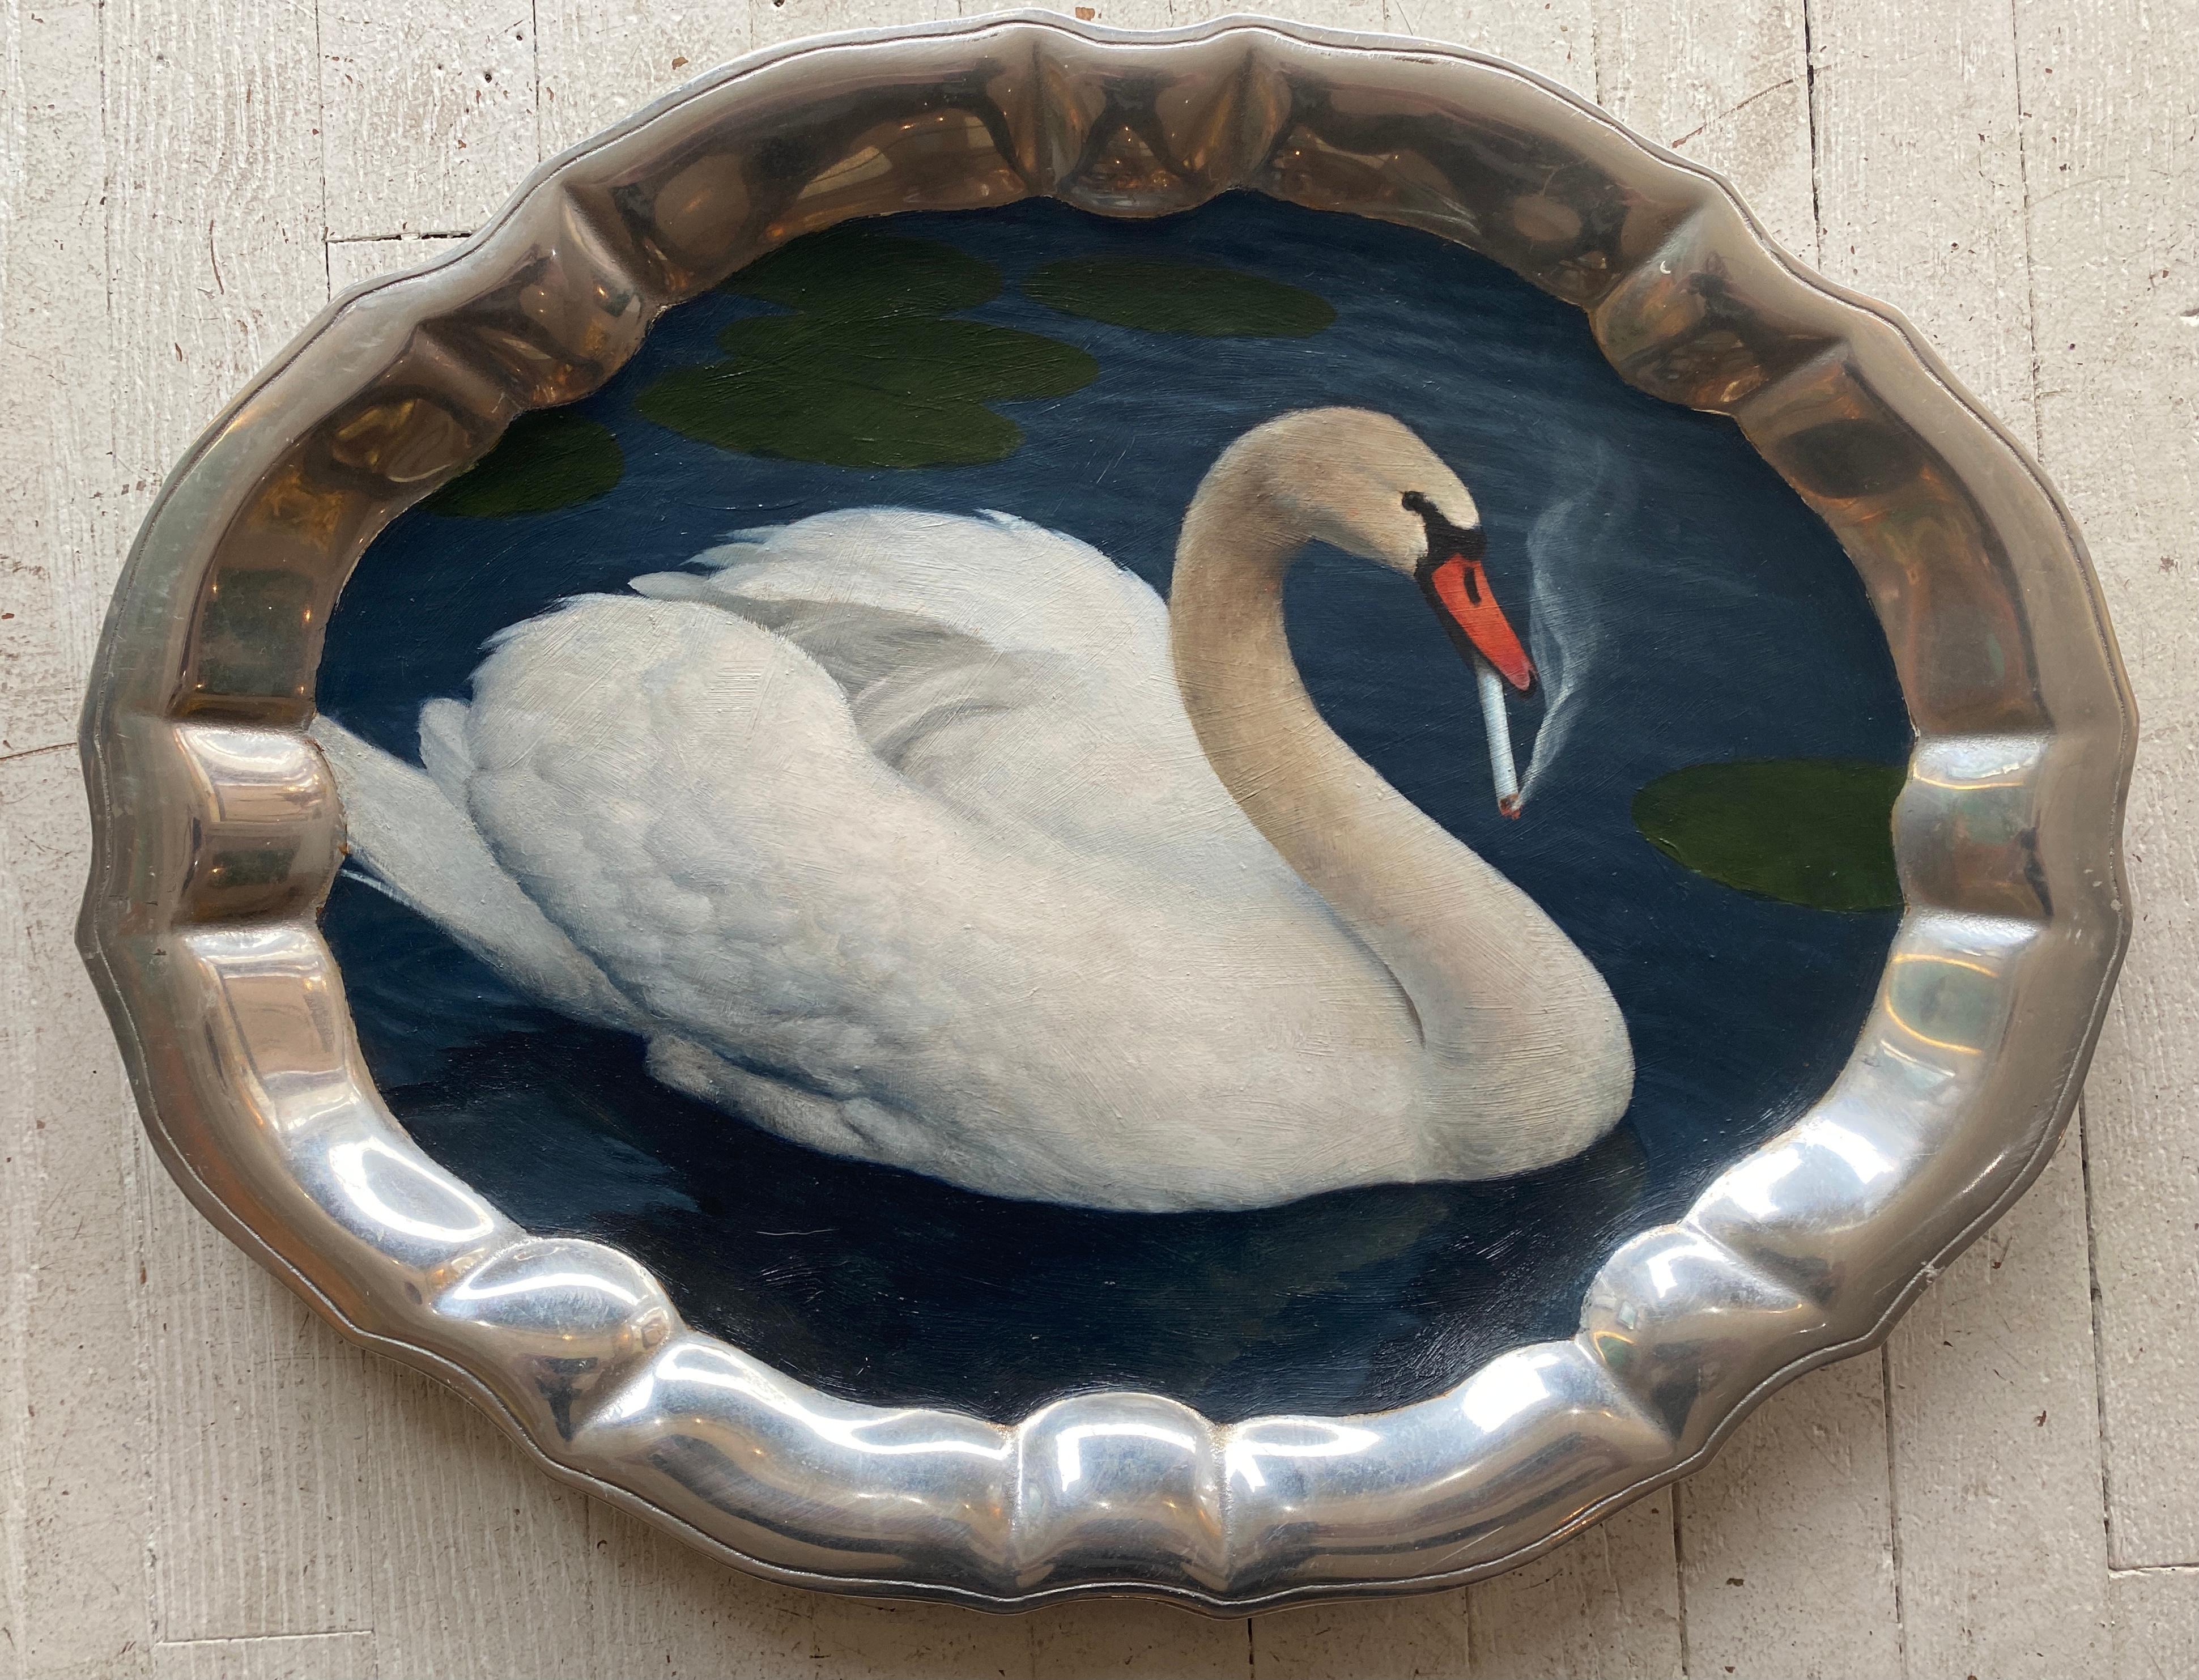 Anthony Ackrill Figurative Painting - "Relapse" - contemporary oil painting on found object, humorous swan smoking cig